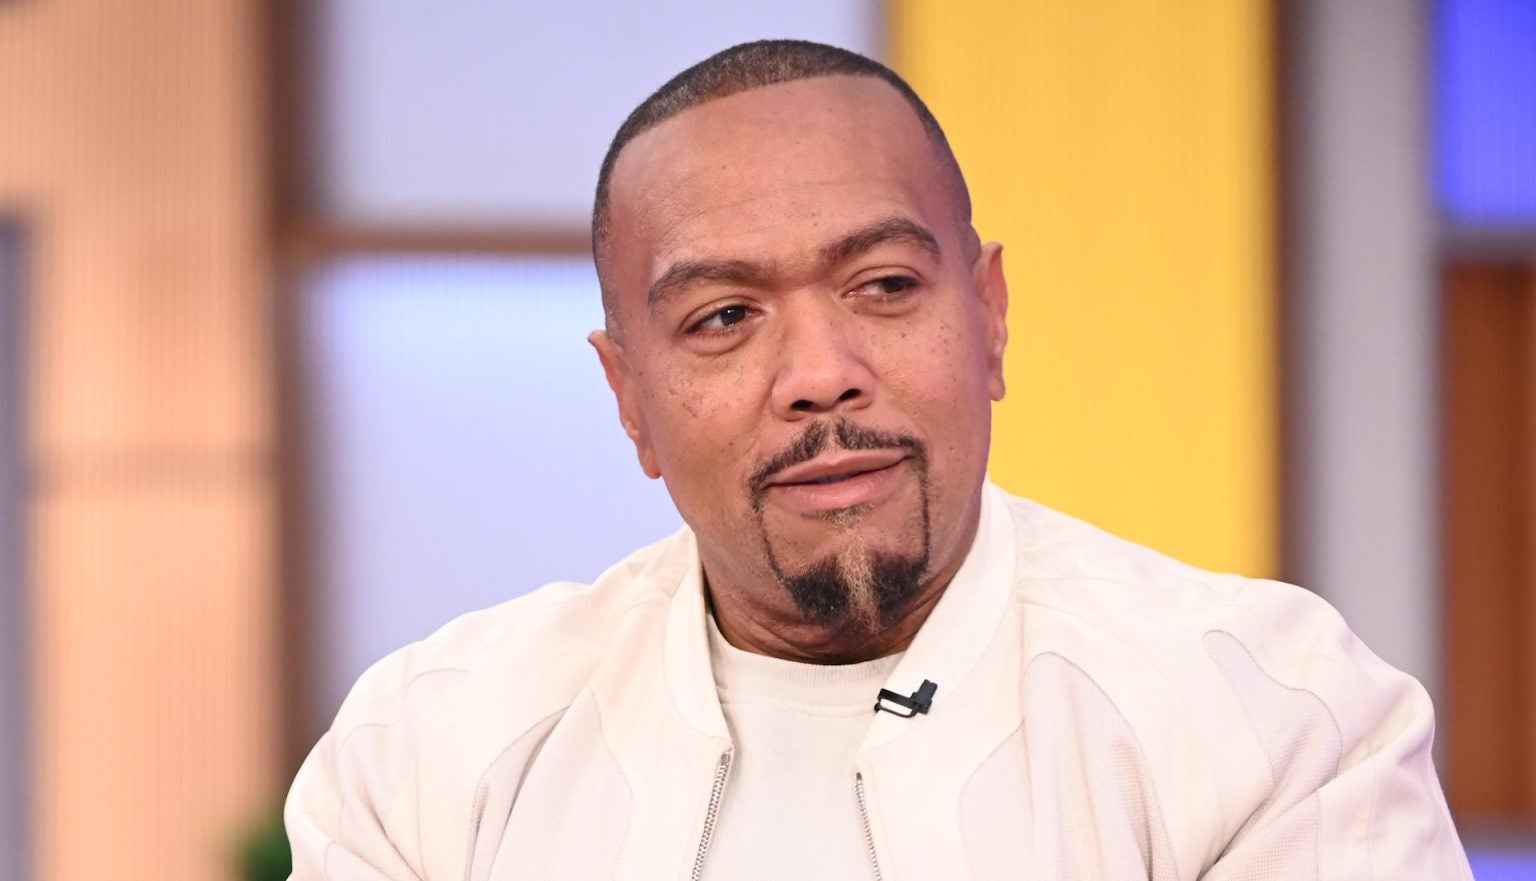 Timbaland Reveals Opioid Addiction Affected His Career: 'I Was Abusing My Gift'